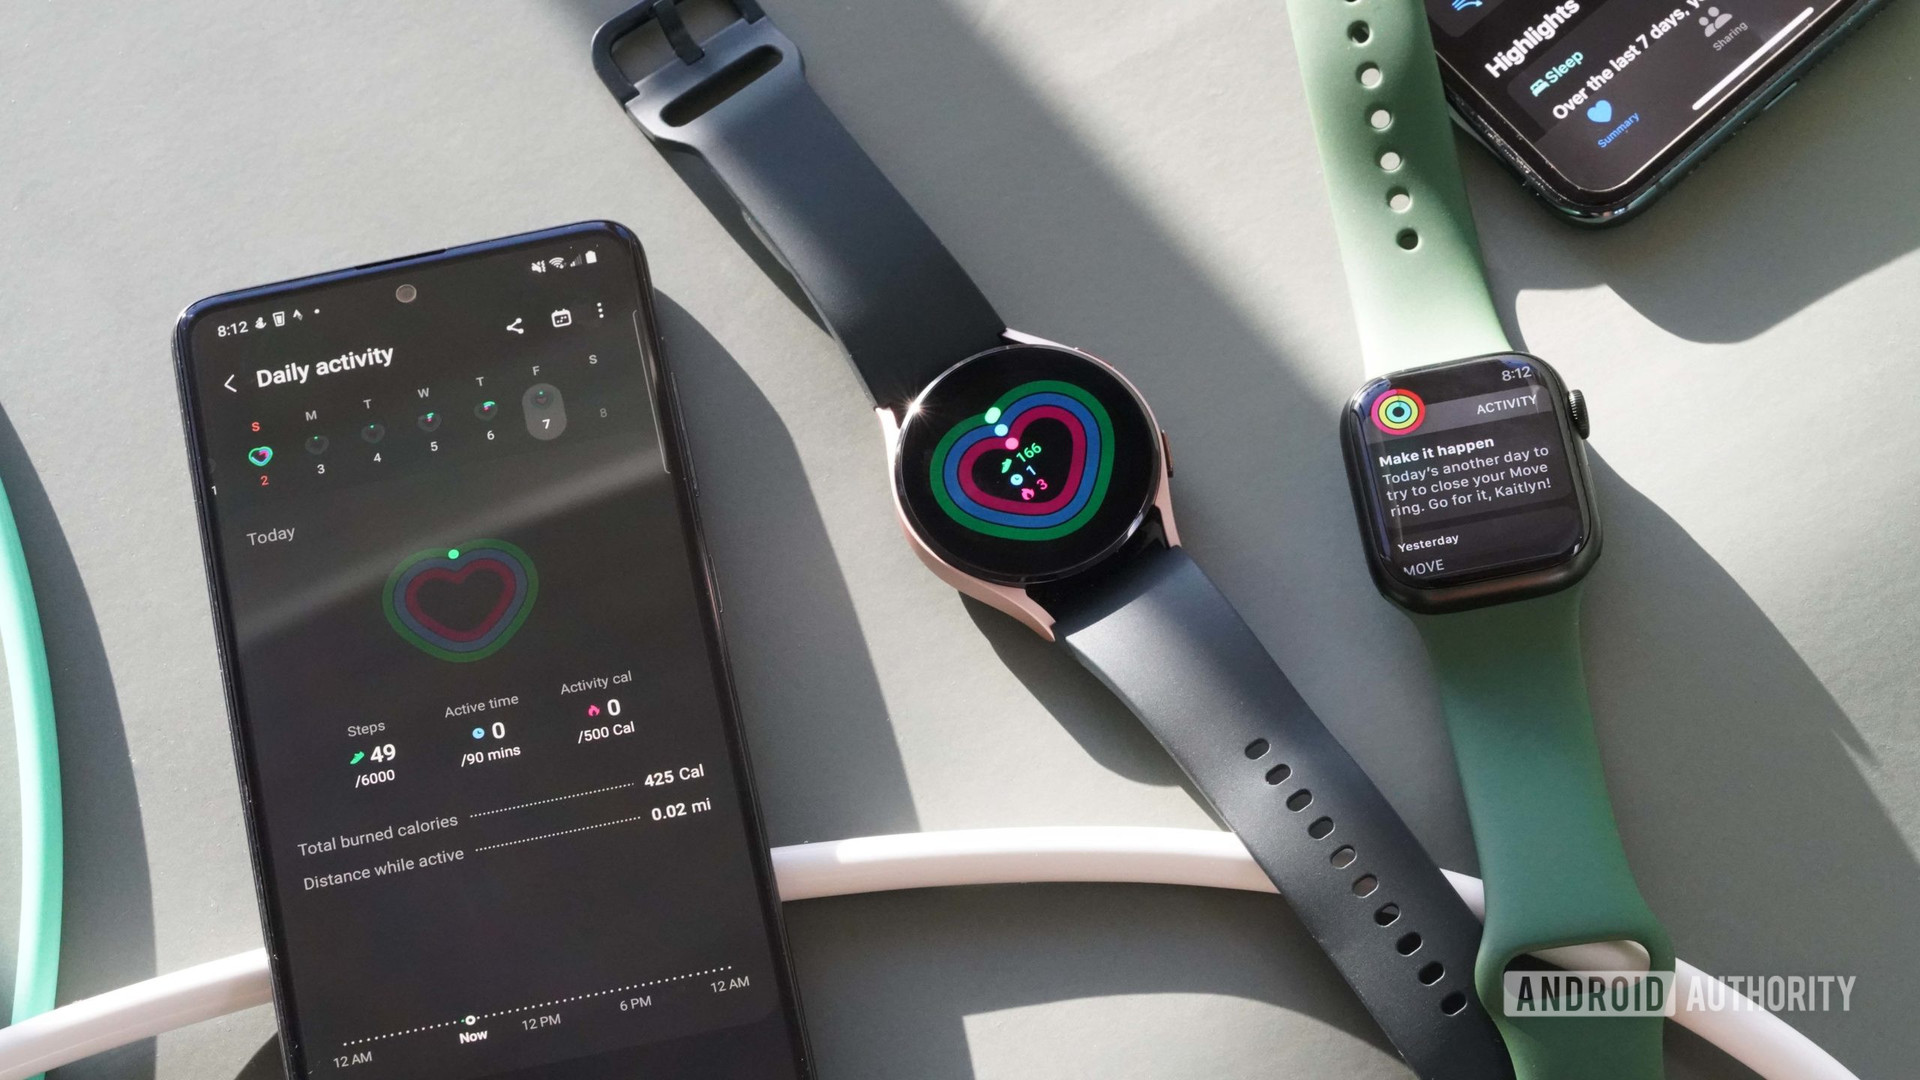 The Samsung Galaxy A51, Samsung Galaxy Watch 4, Apple Watch Series 7, and iPhone 11 sit on a green yoga mat that displays activity-related information or alerts.